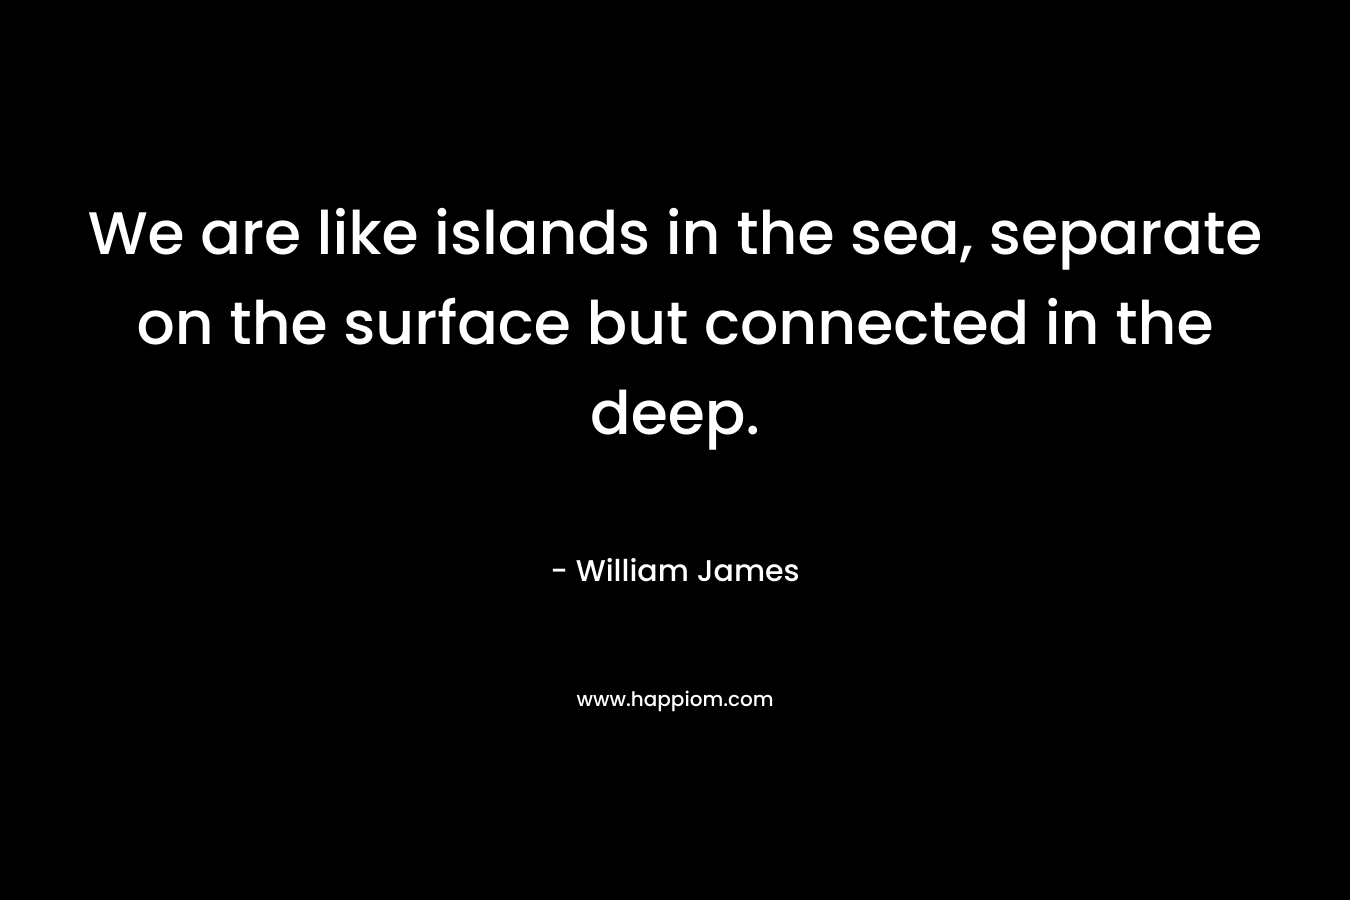 We are like islands in the sea, separate on the surface but connected in the deep. – William James